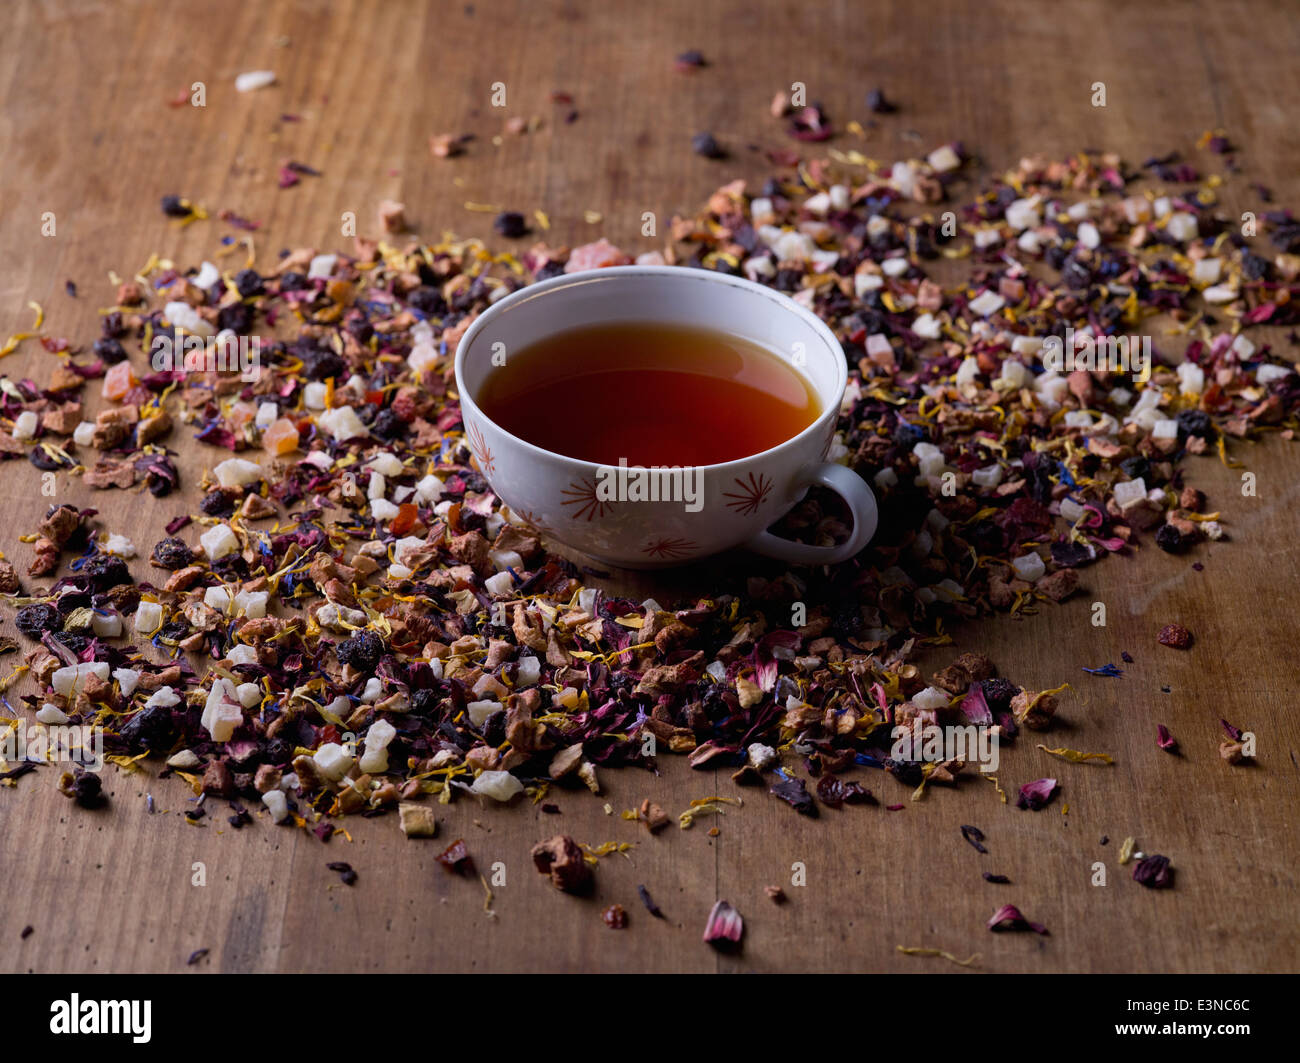 Tea cup amidst herbs on wooden table Stock Photo